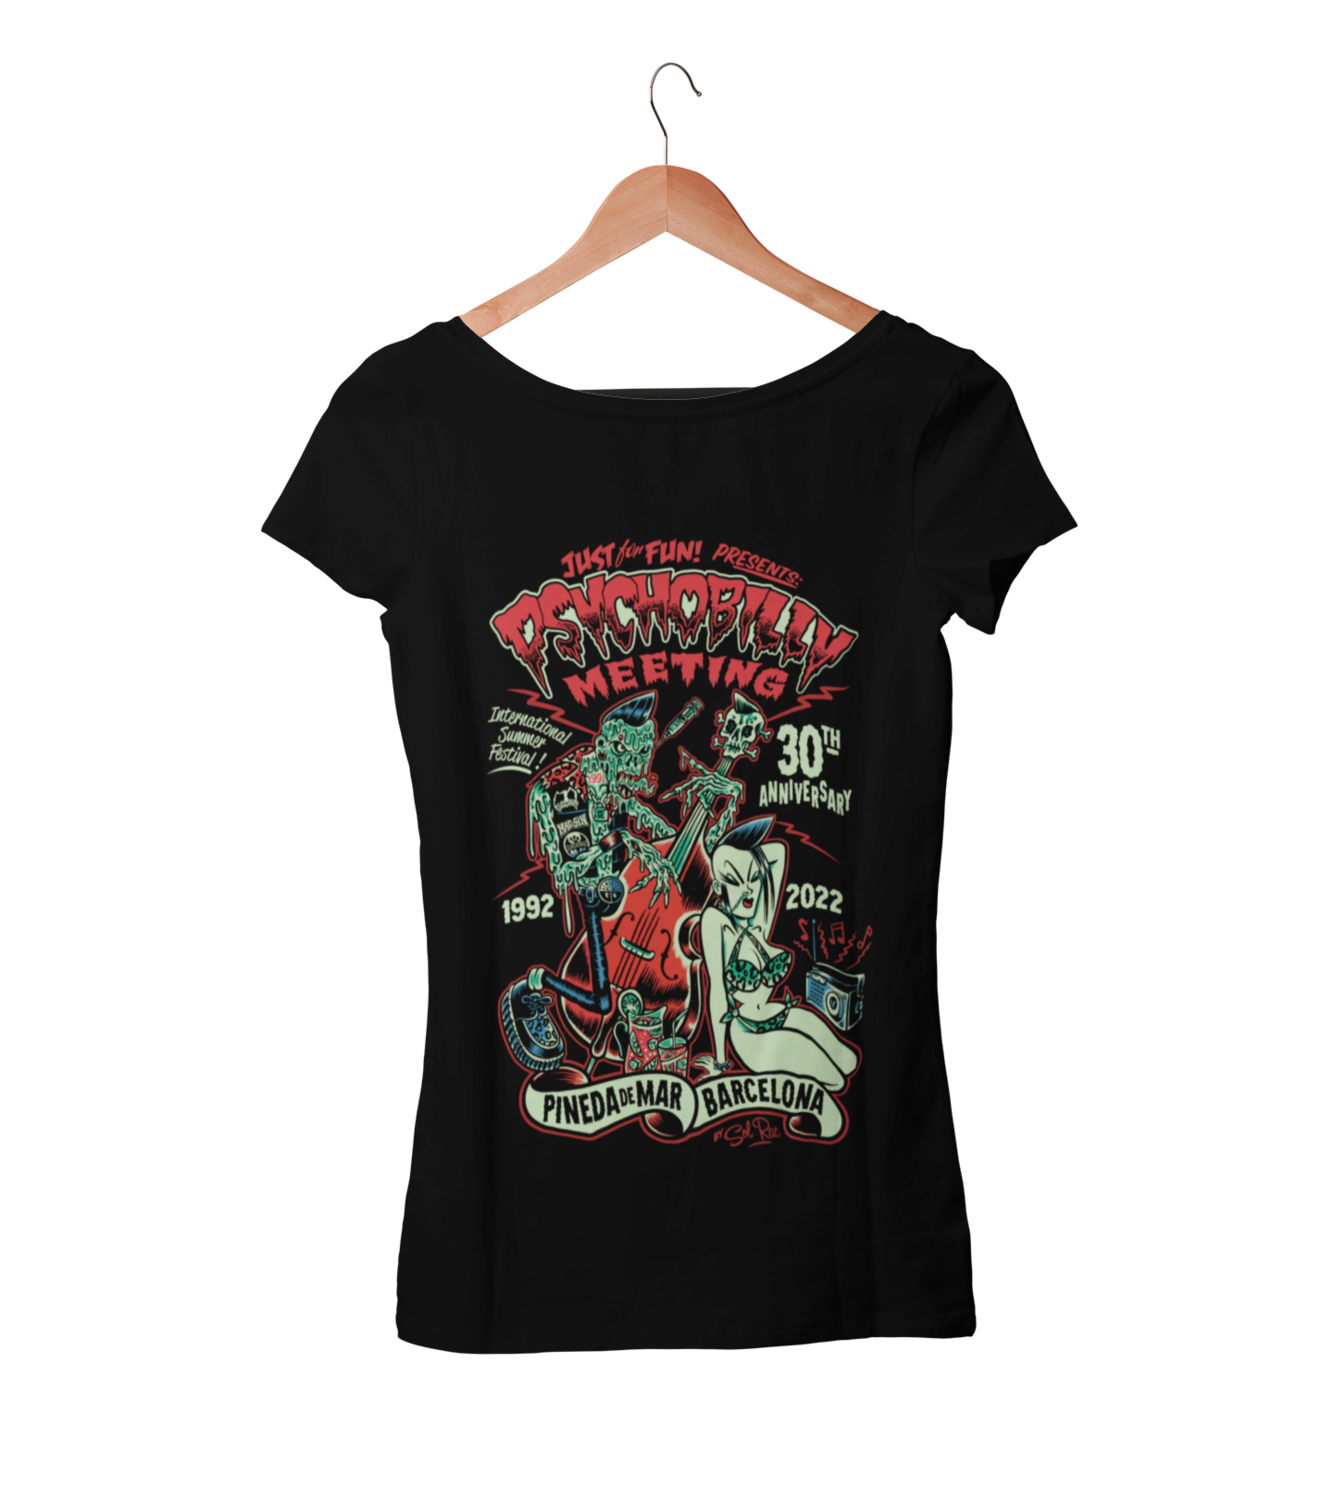 PSYCHOBILLY MEETING 2022 T-SHIRT WOMAN BY SOLRAC